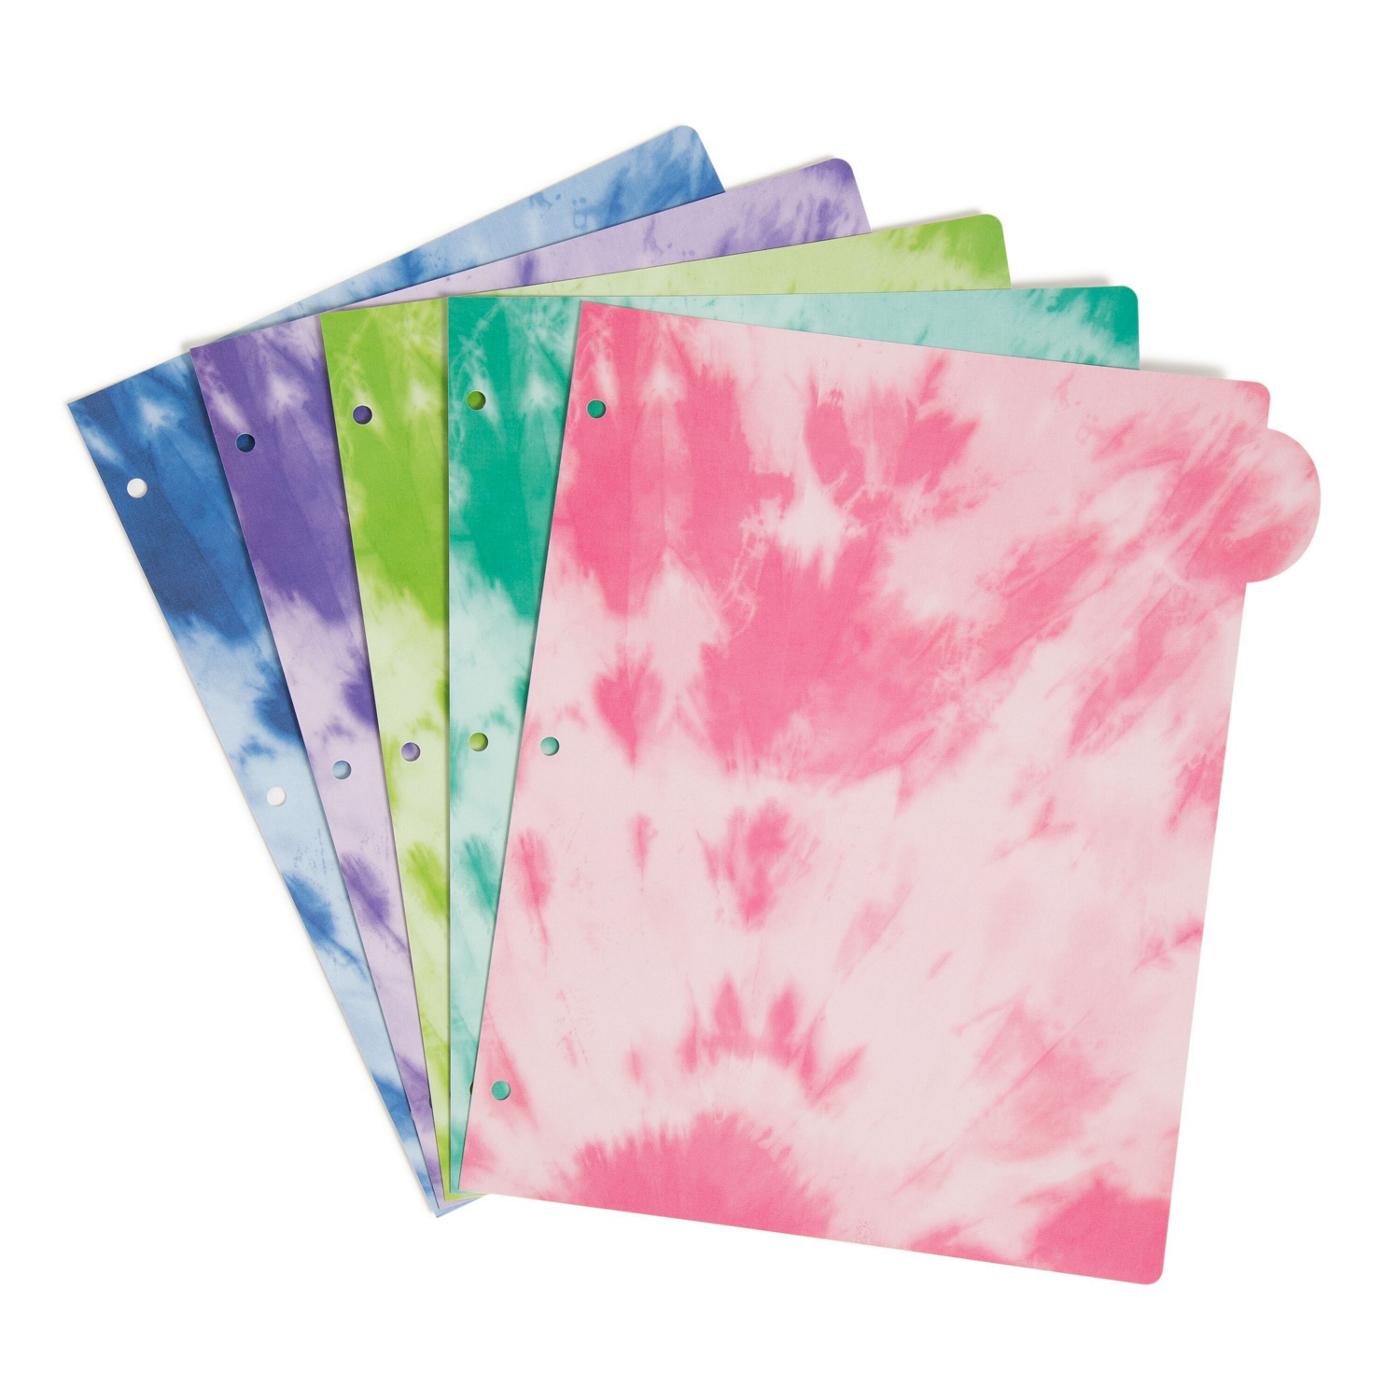 U Brands Assorted Tab Dividers - Bright Dye, 5 Ct; image 2 of 3